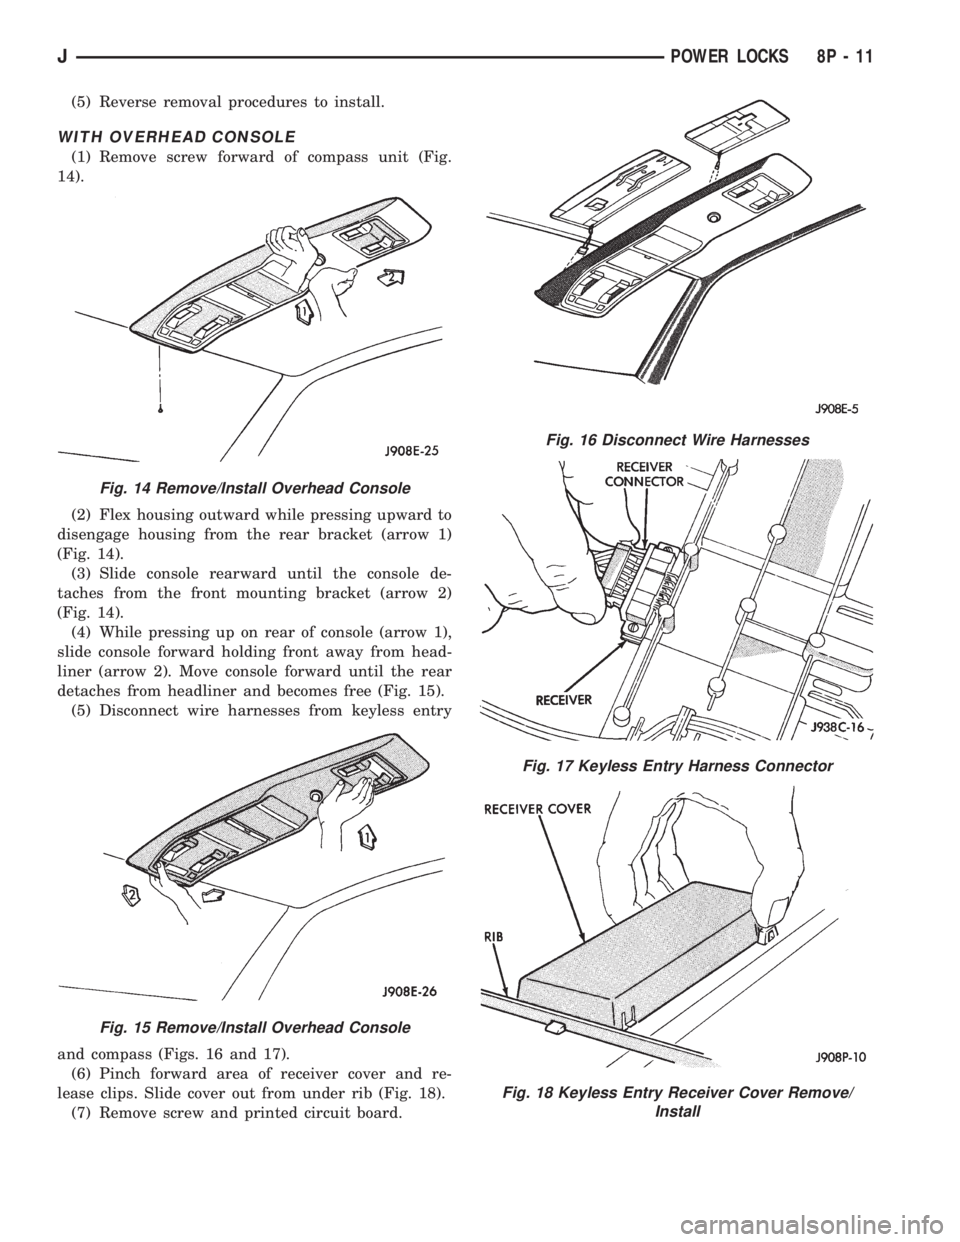 JEEP CHEROKEE 1995  Service Repair Manual (5) Reverse removal procedures to install.
WITH OVERHEAD CONSOLE
(1) Remove screw forward of compass unit (Fig.
14).
(2) Flex housing outward while pressing upward to
disengage housing from the rear b